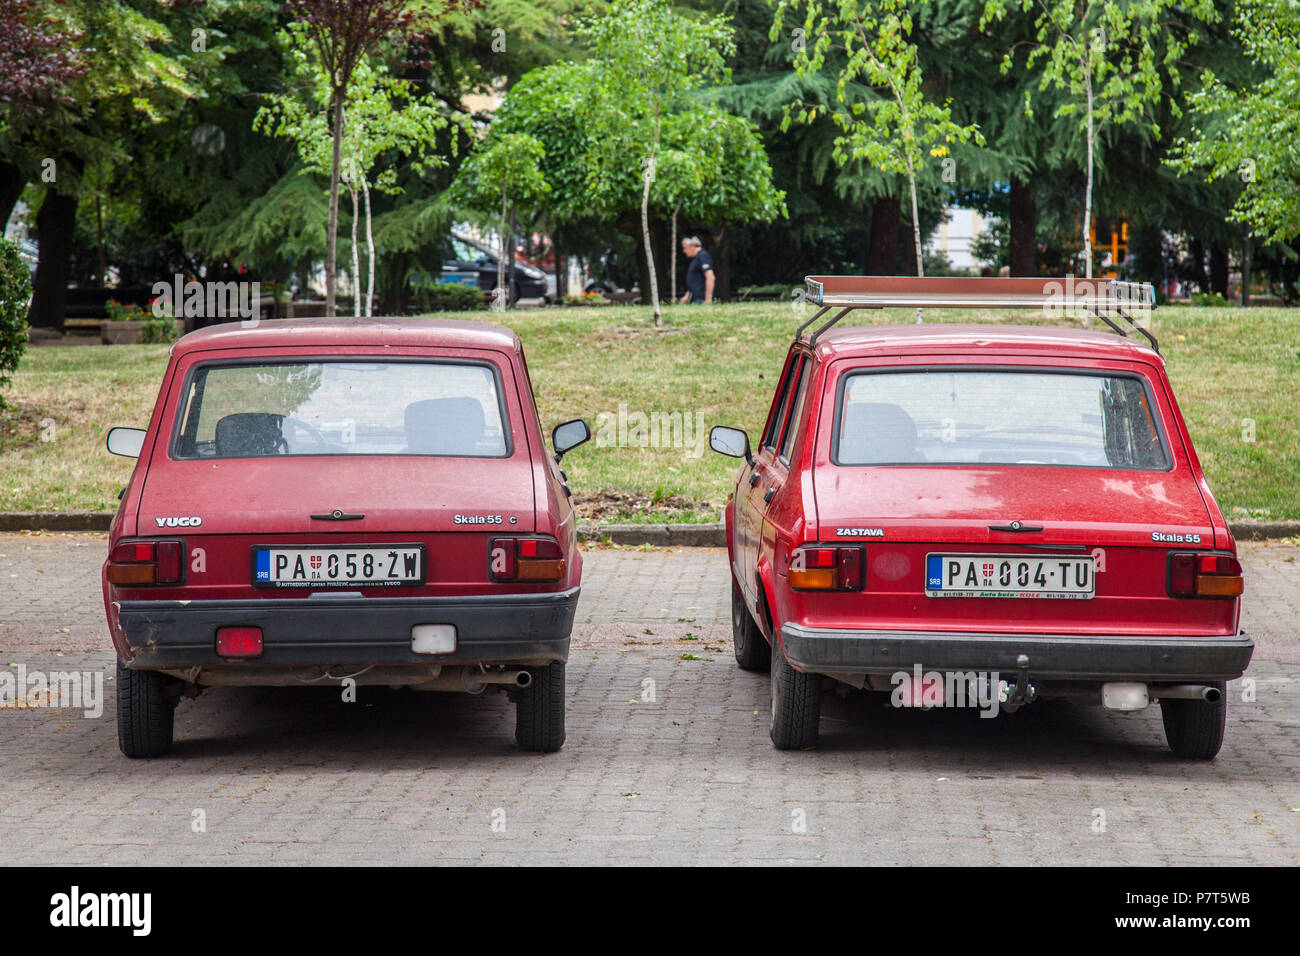 PANCEVO, SERBIA - JUNE 9, 2018: Two Zastava and Yugo 55 red cars parked. Also known as Skala, it is a generic name for a family of cars built by Serbi Stock Photo